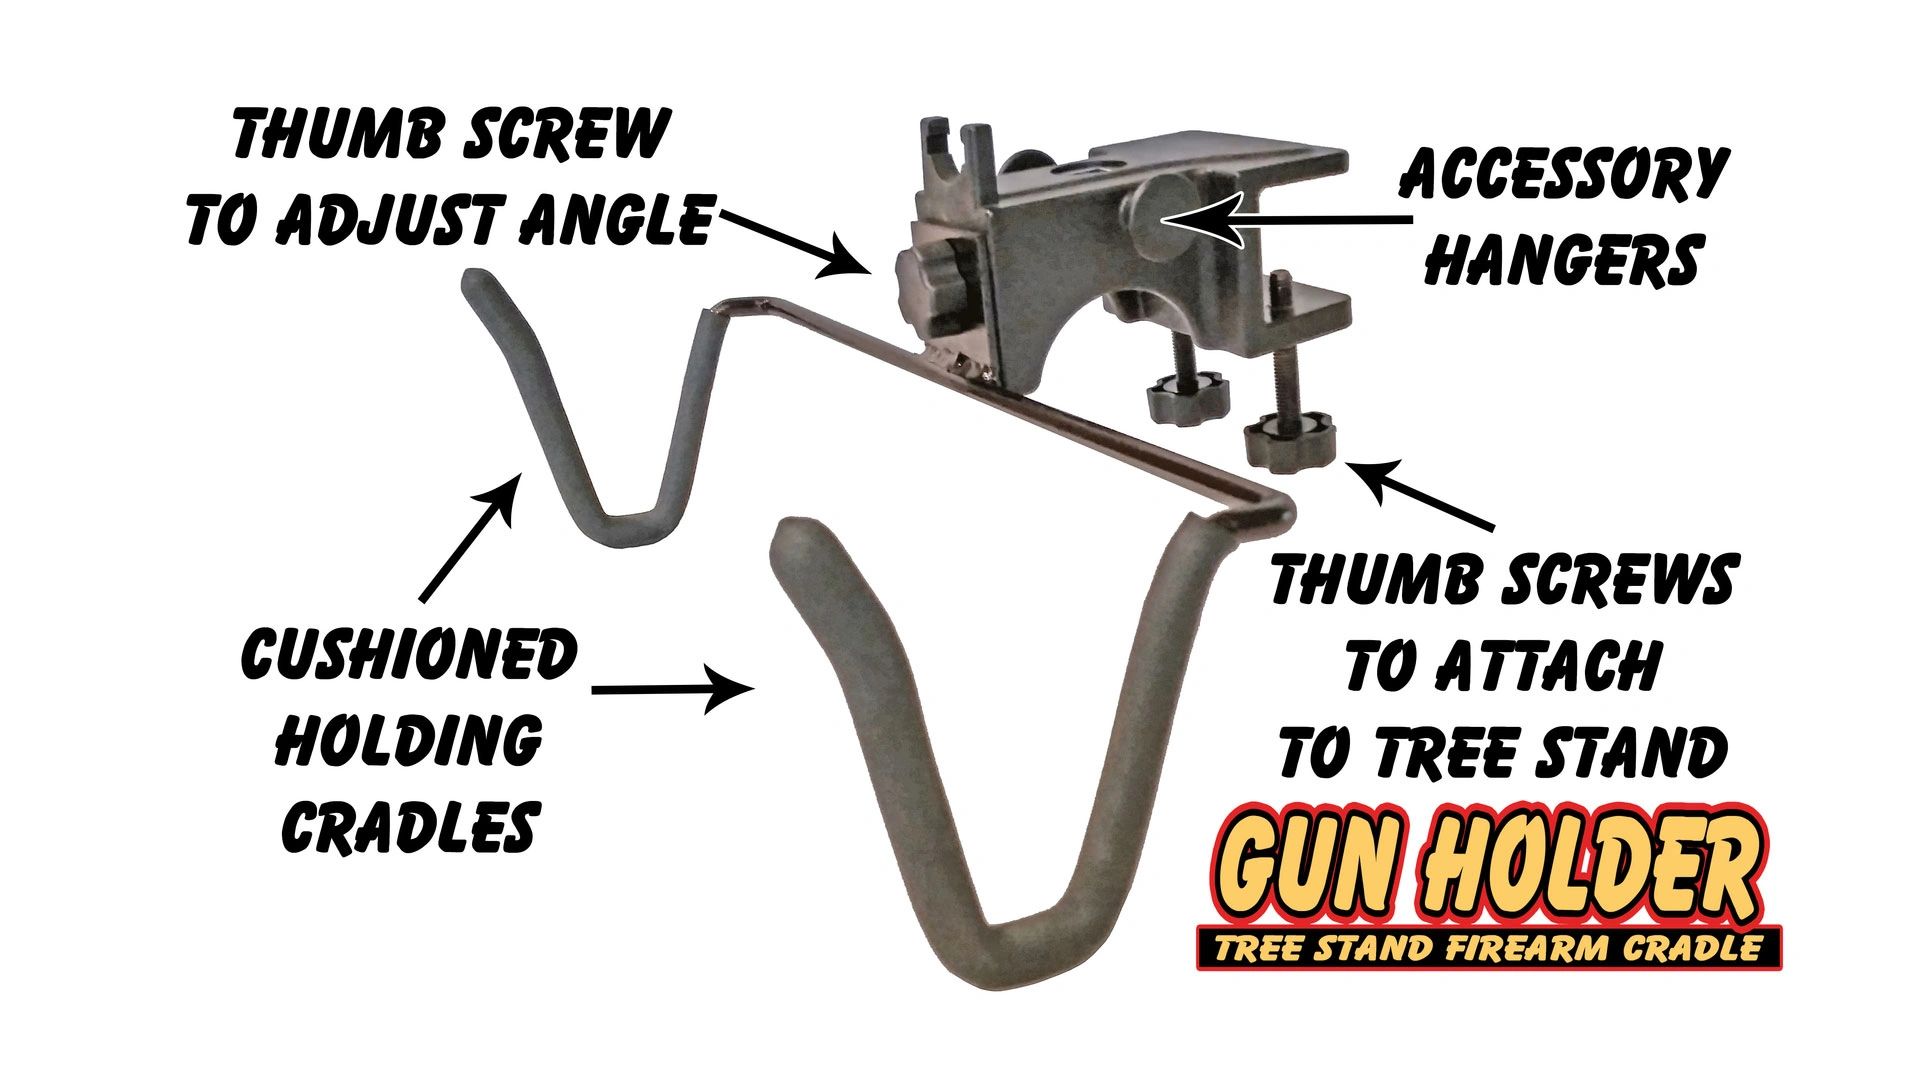 A Diagram of an adjustable Gun Holder for a tree stand that goes on and off with NO TOOLS